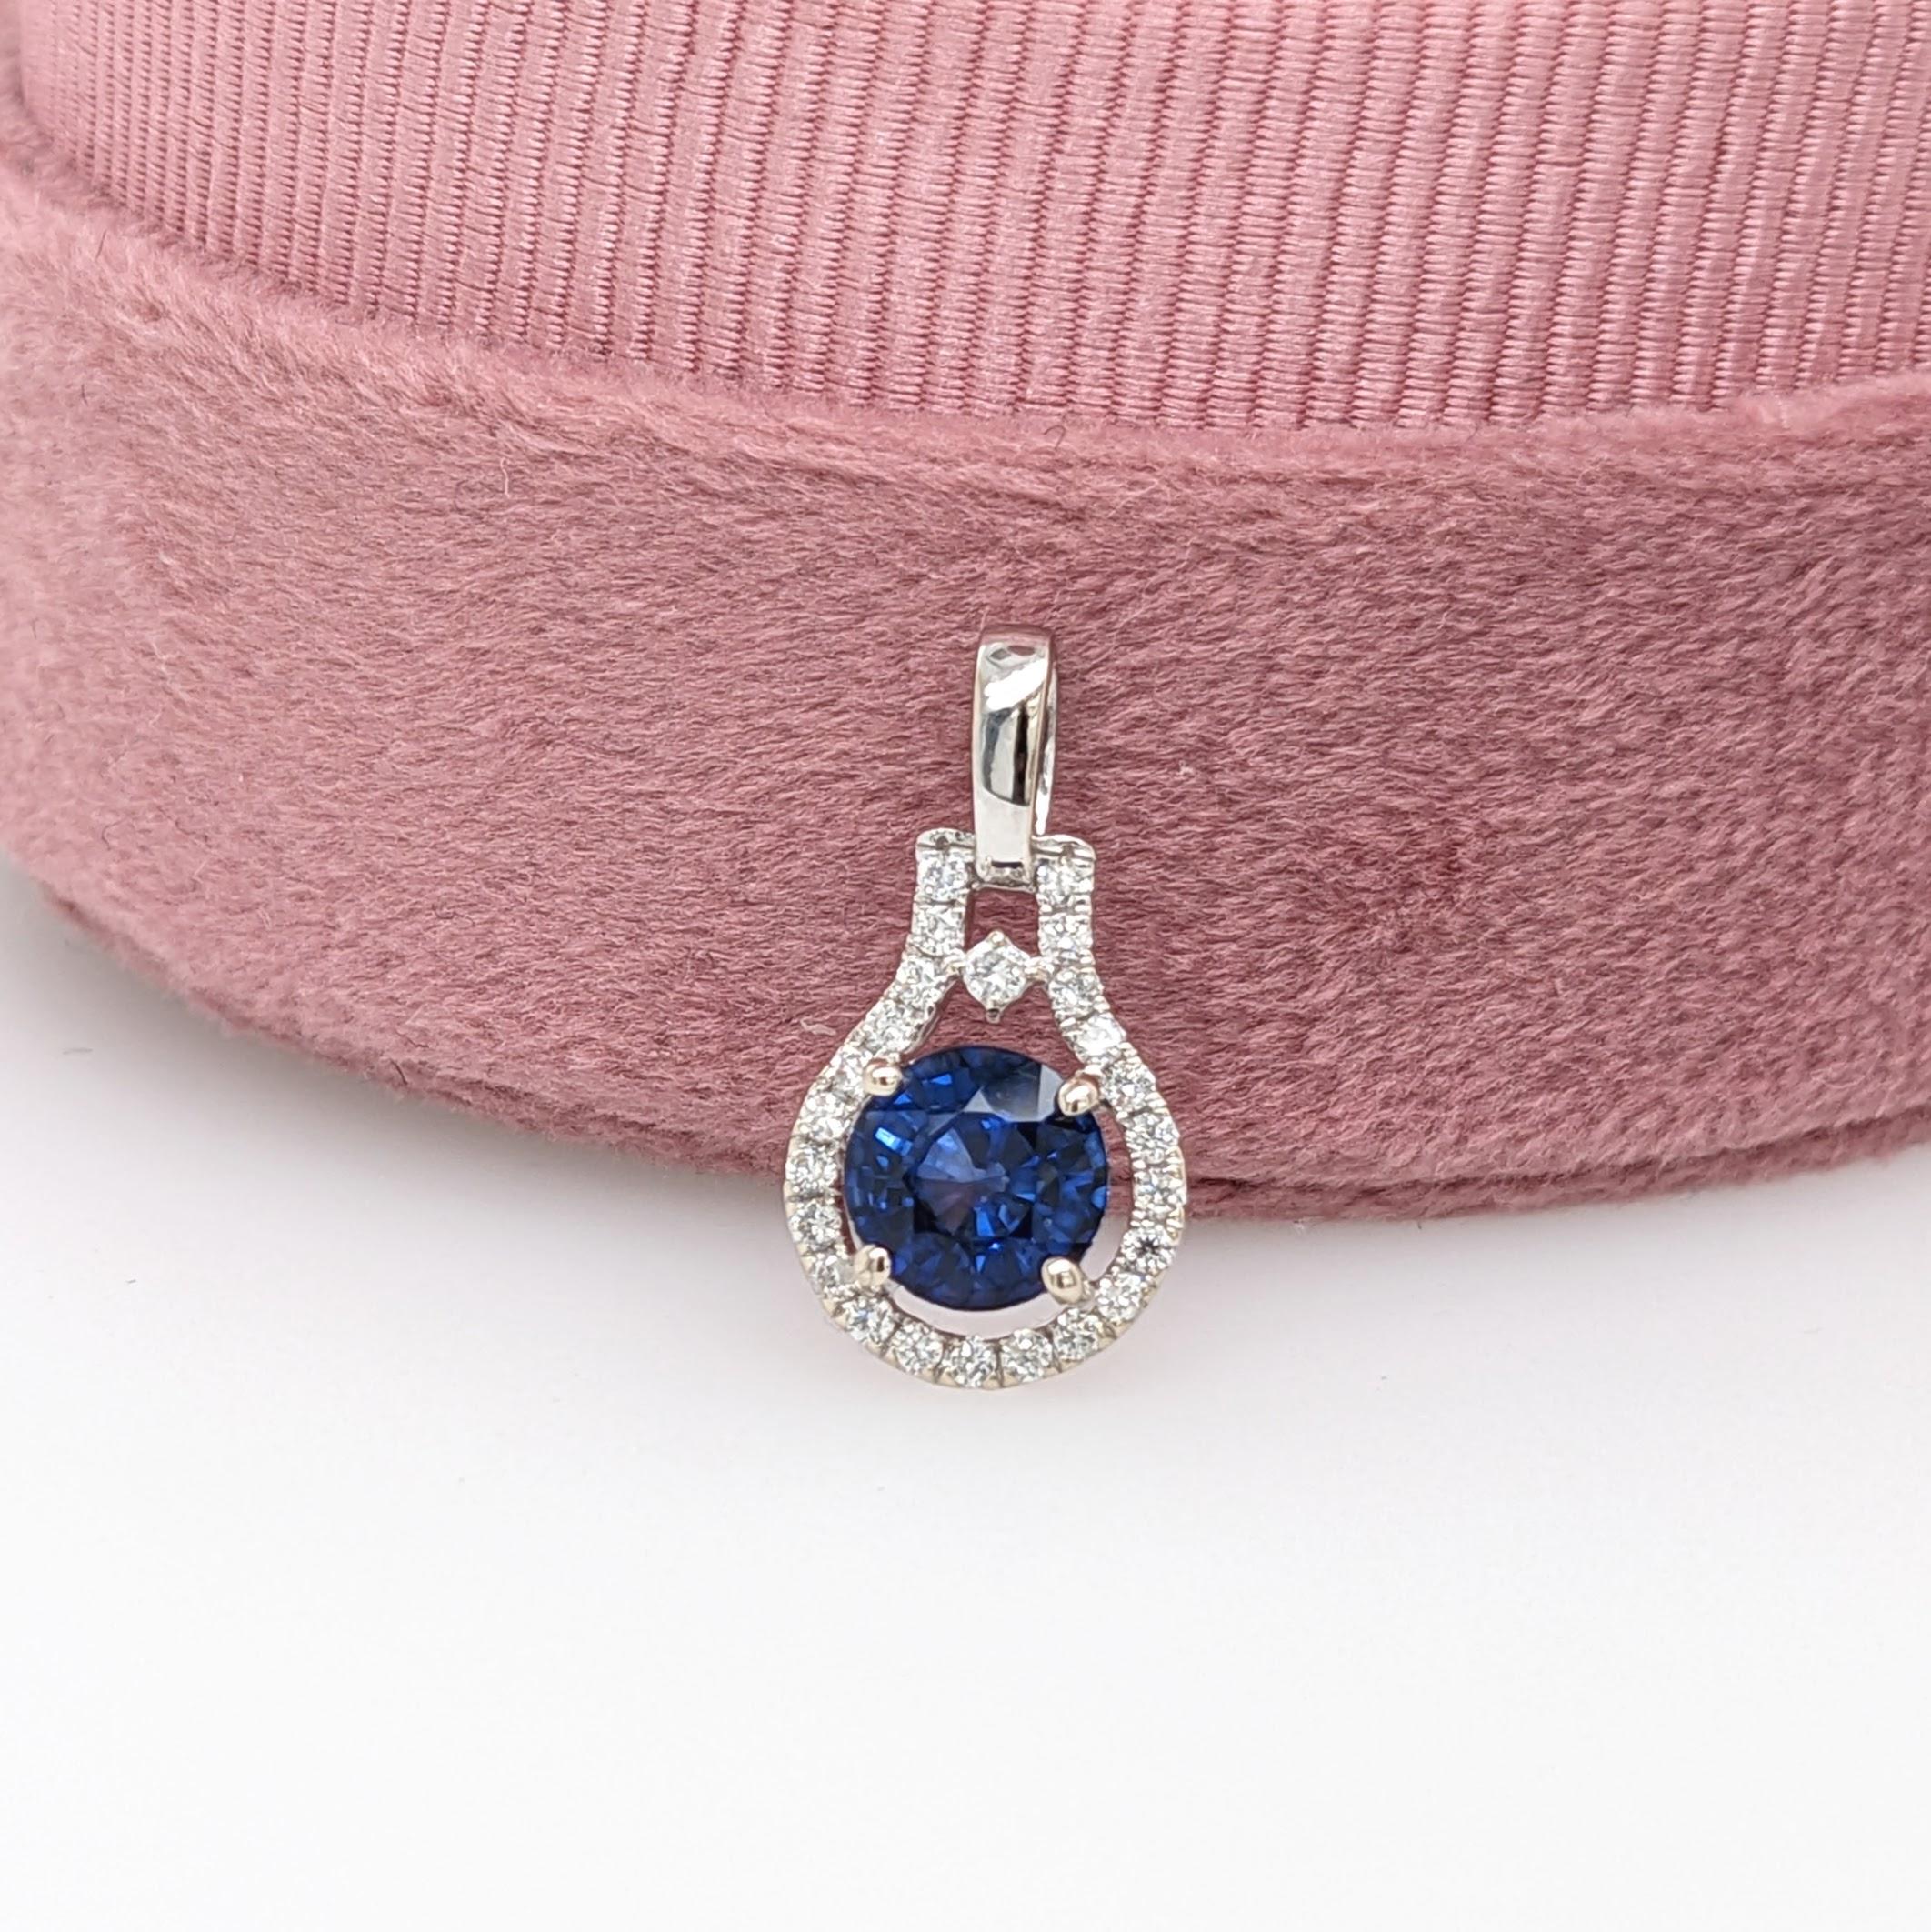 1.21ct AAA Blue Sapphire w Diamond Accents in Solid 14K White Gold Round 6mm 2